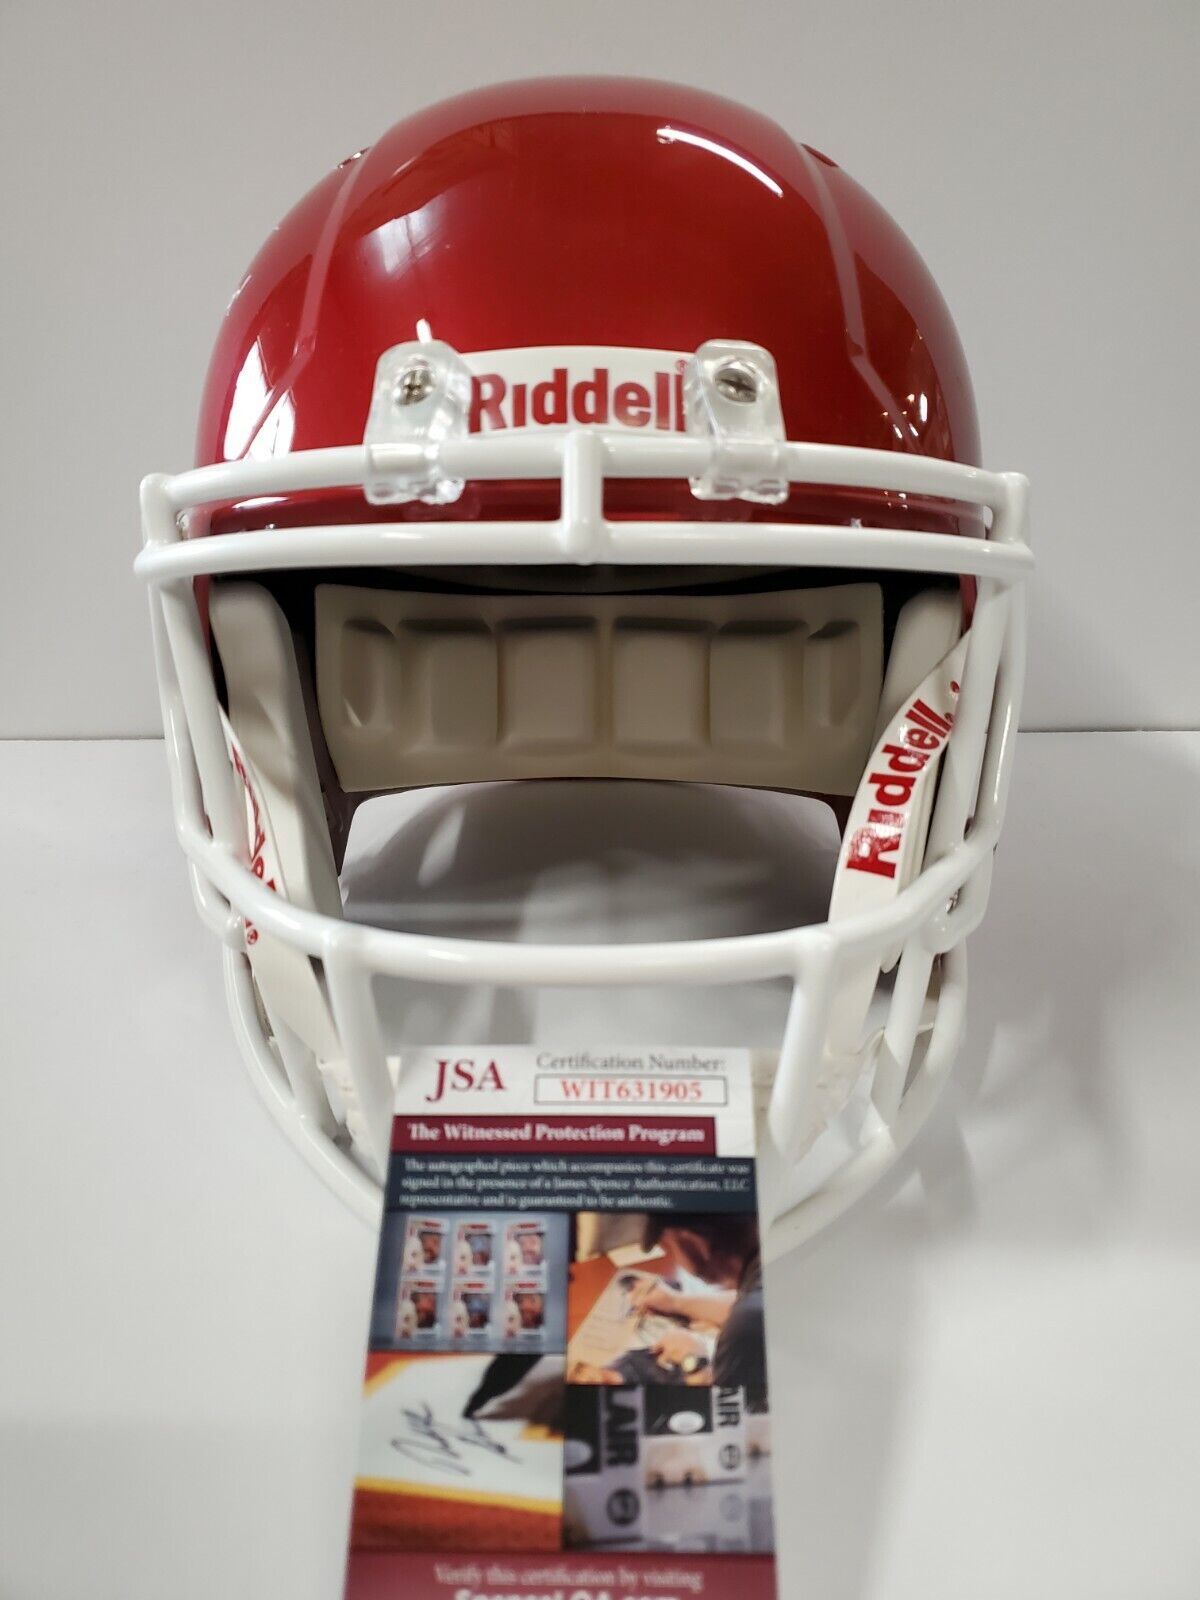 MVP Authentics Marquise Brown Autographed Inscribed Oklahoma Sooners Full Sz Rep Helmet Jsa Coa 337.50 sports jersey framing , jersey framing